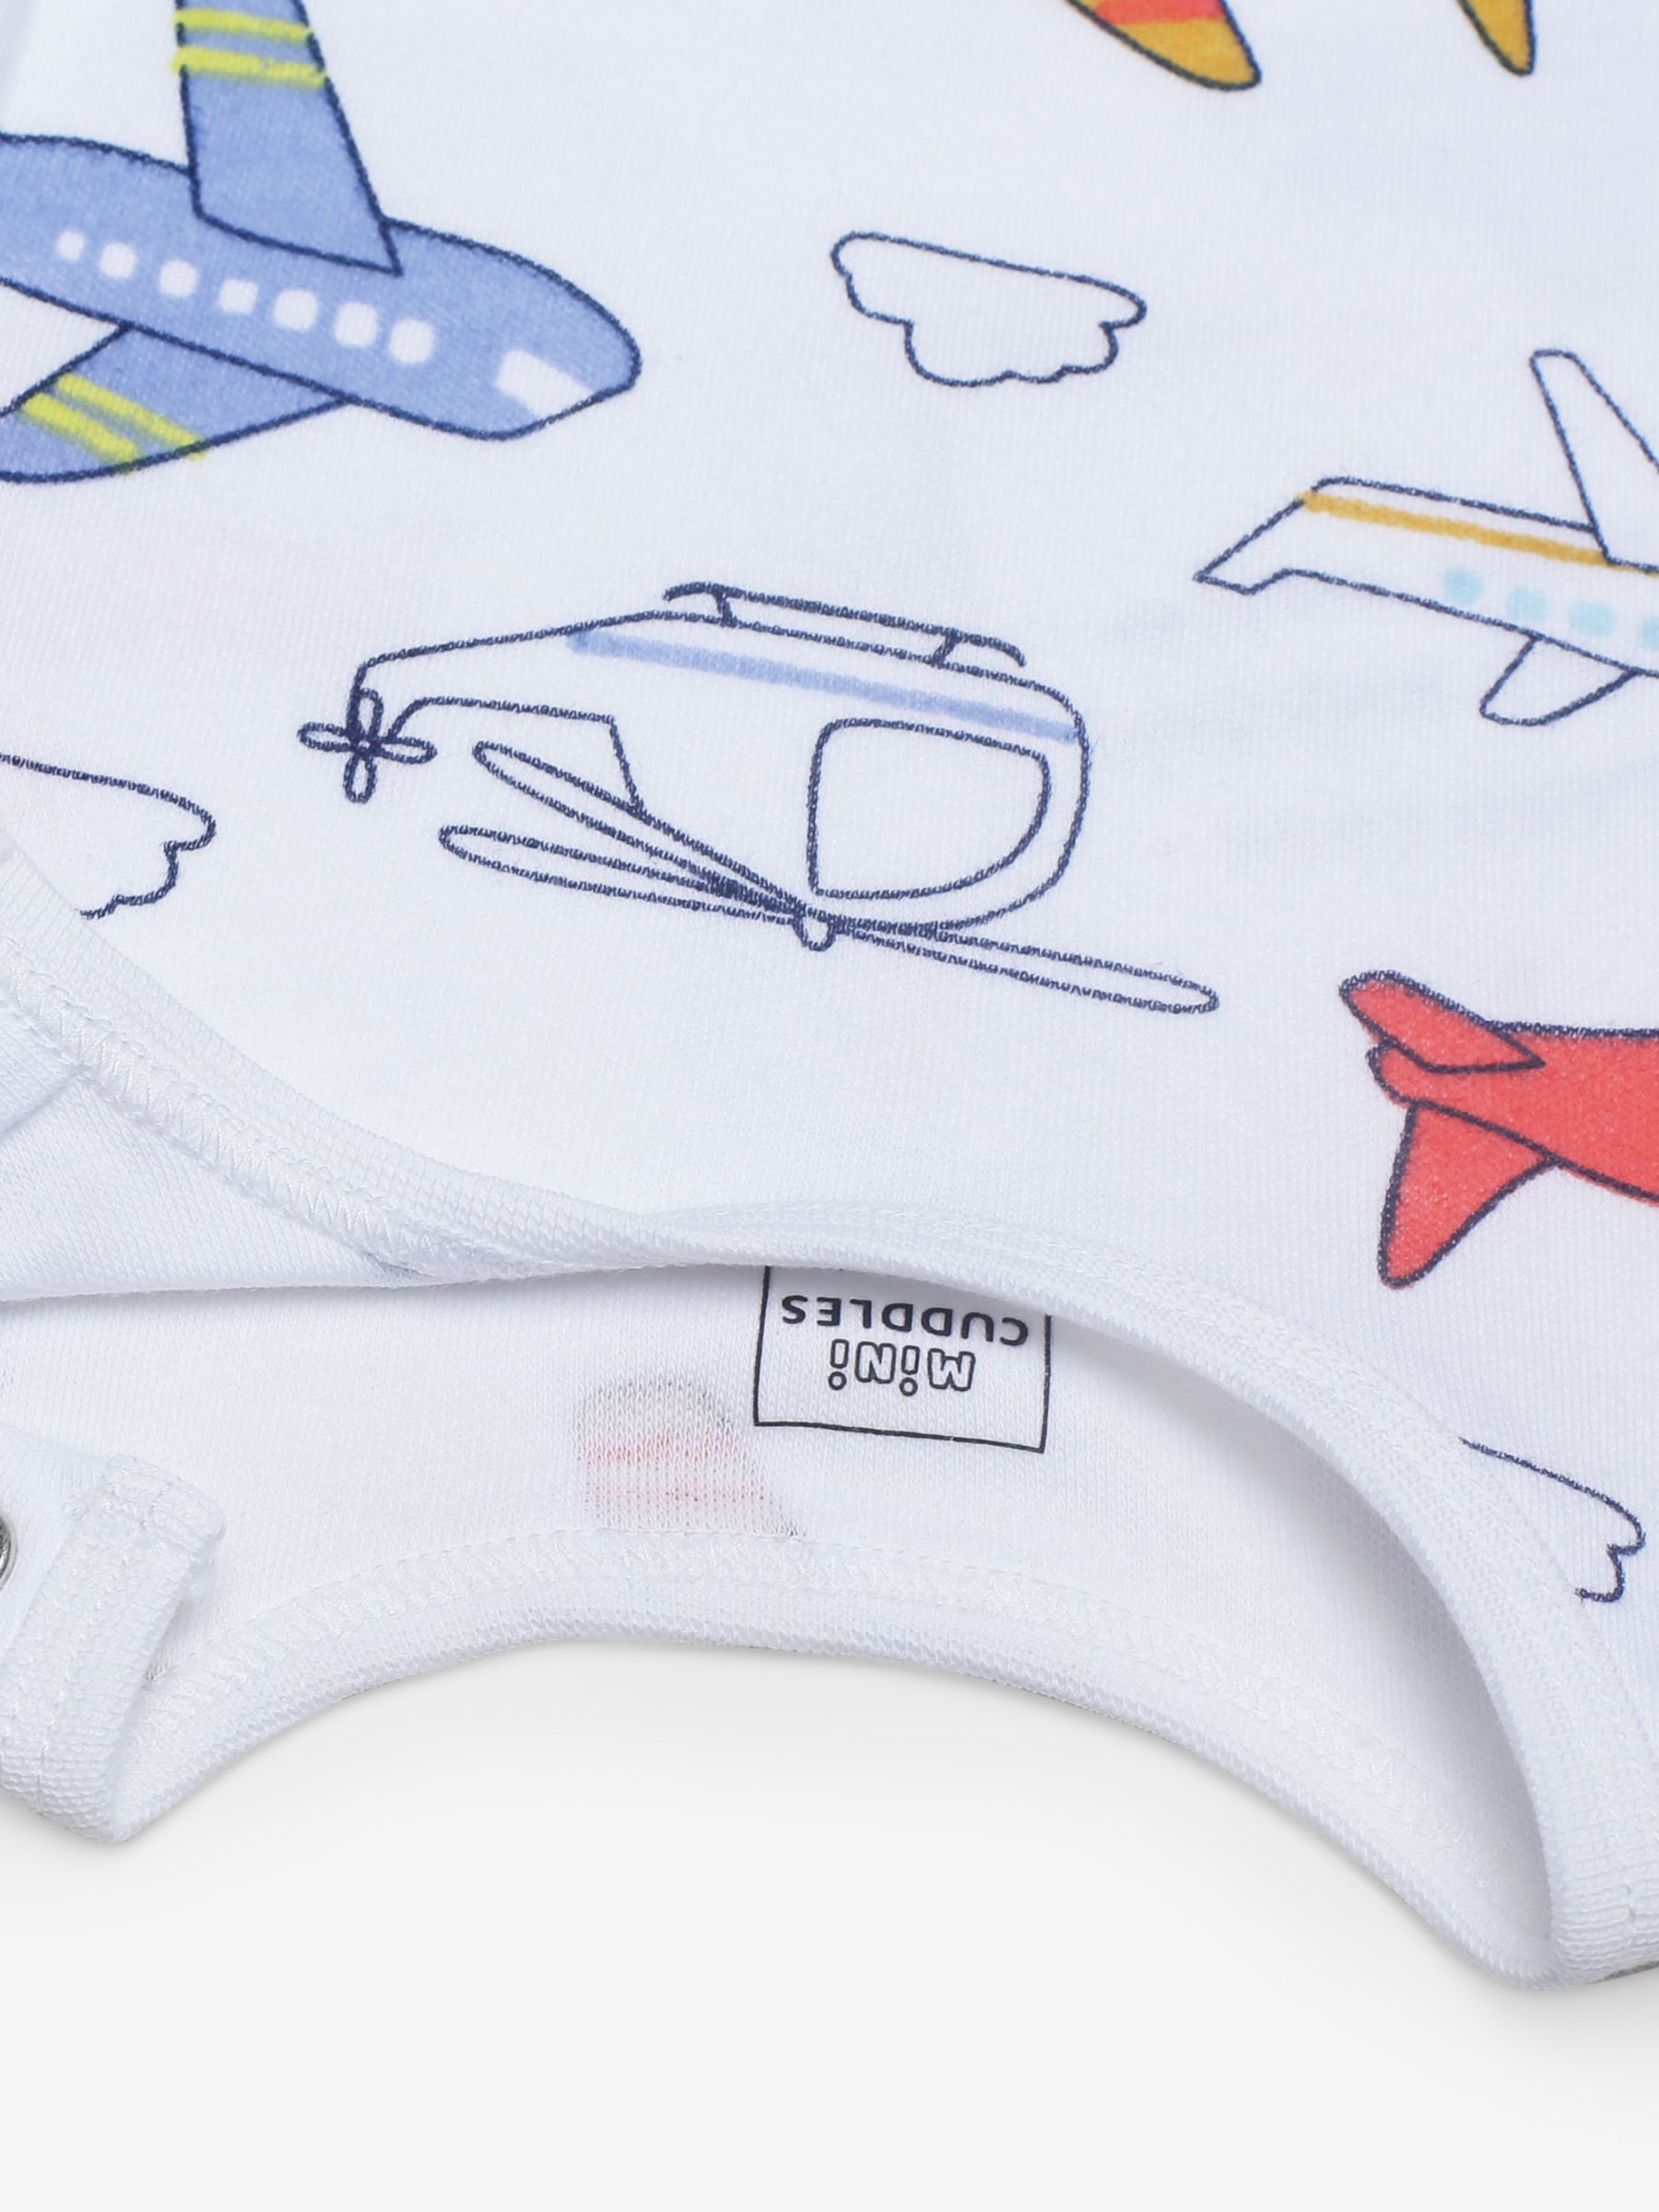 Mini Cuddles Baby Planes, Trains & Automobile Graphic Bodysuits, Pack of 3, Multi, 6-9 months